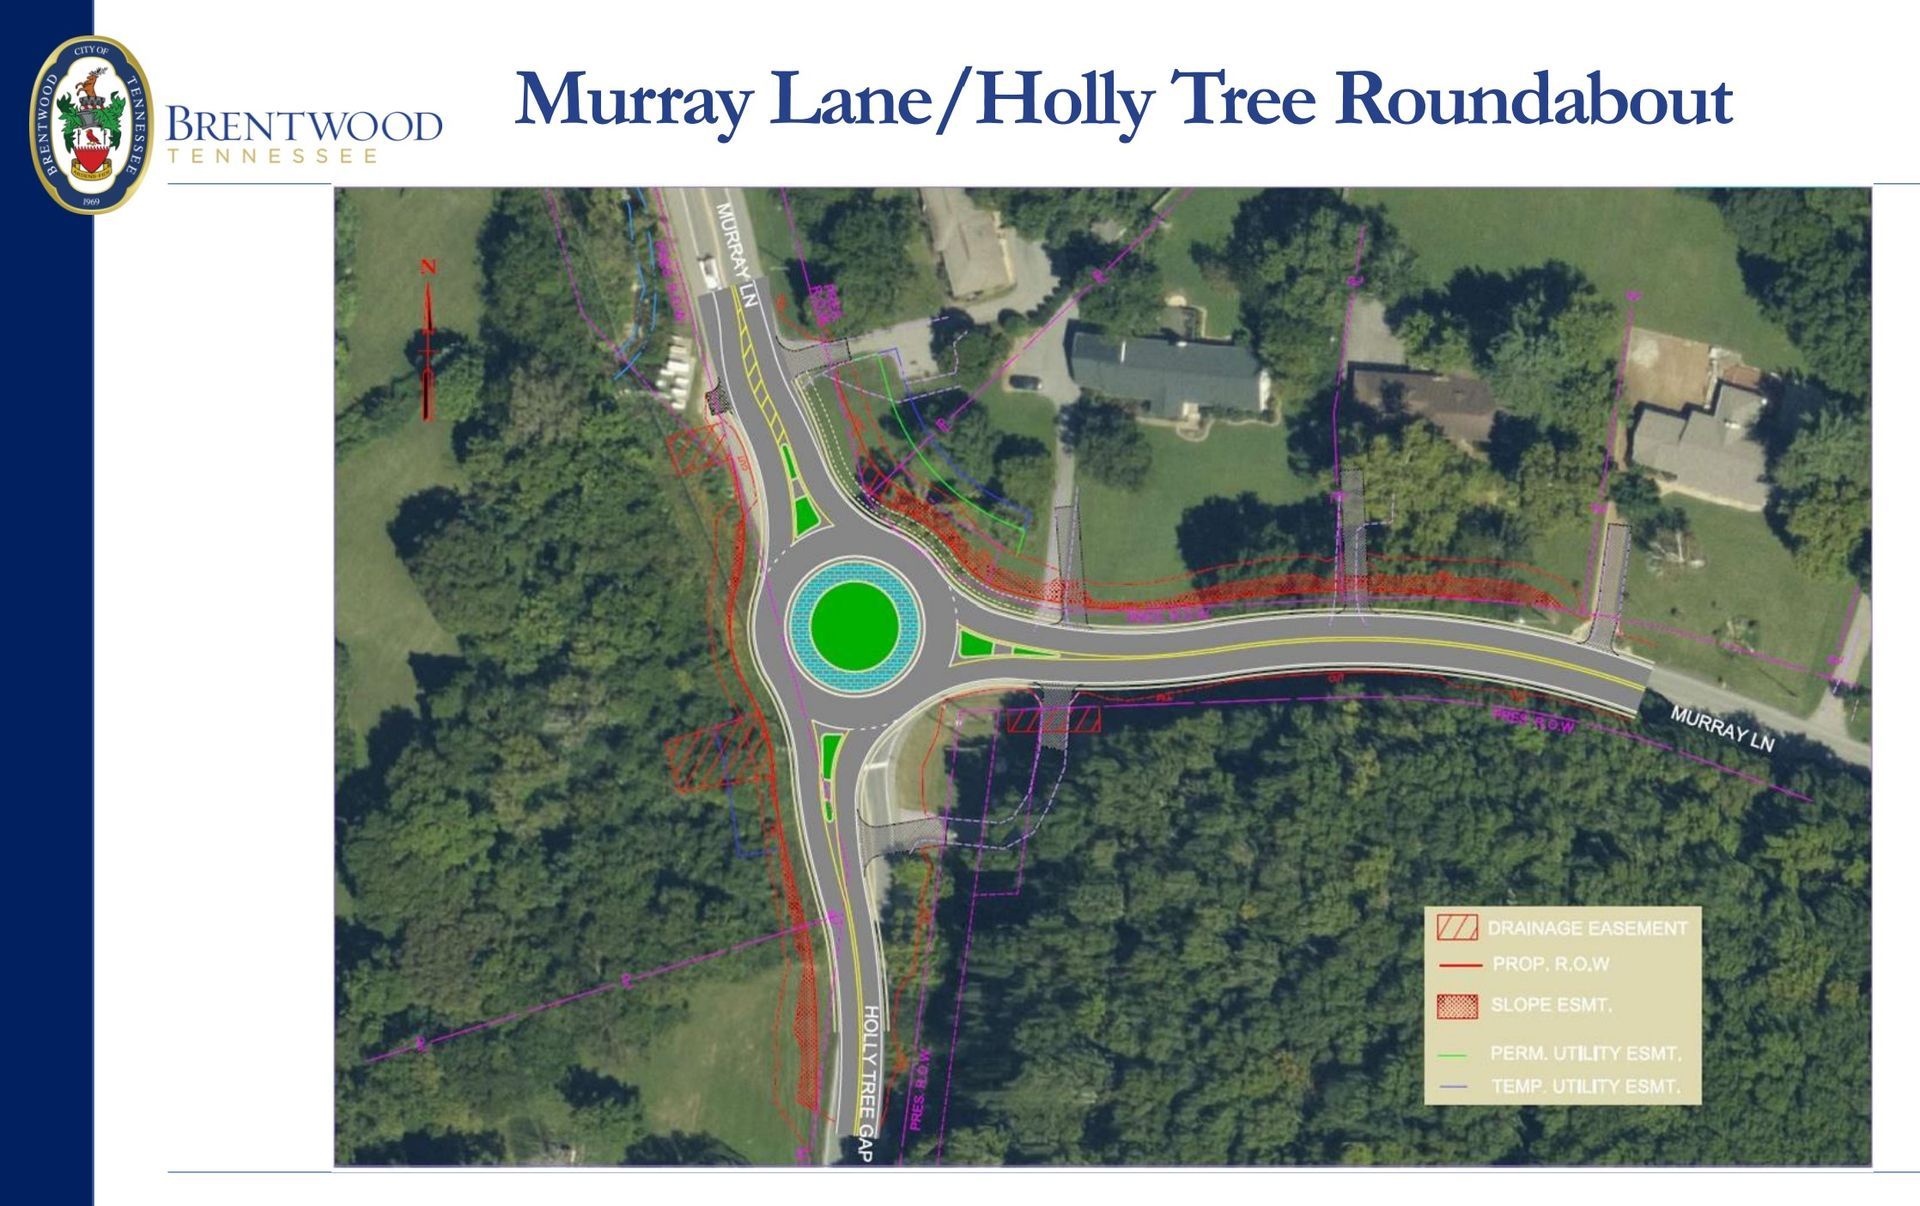 Future roundabout at the intersection of Murray Lane and Hollytree Gap